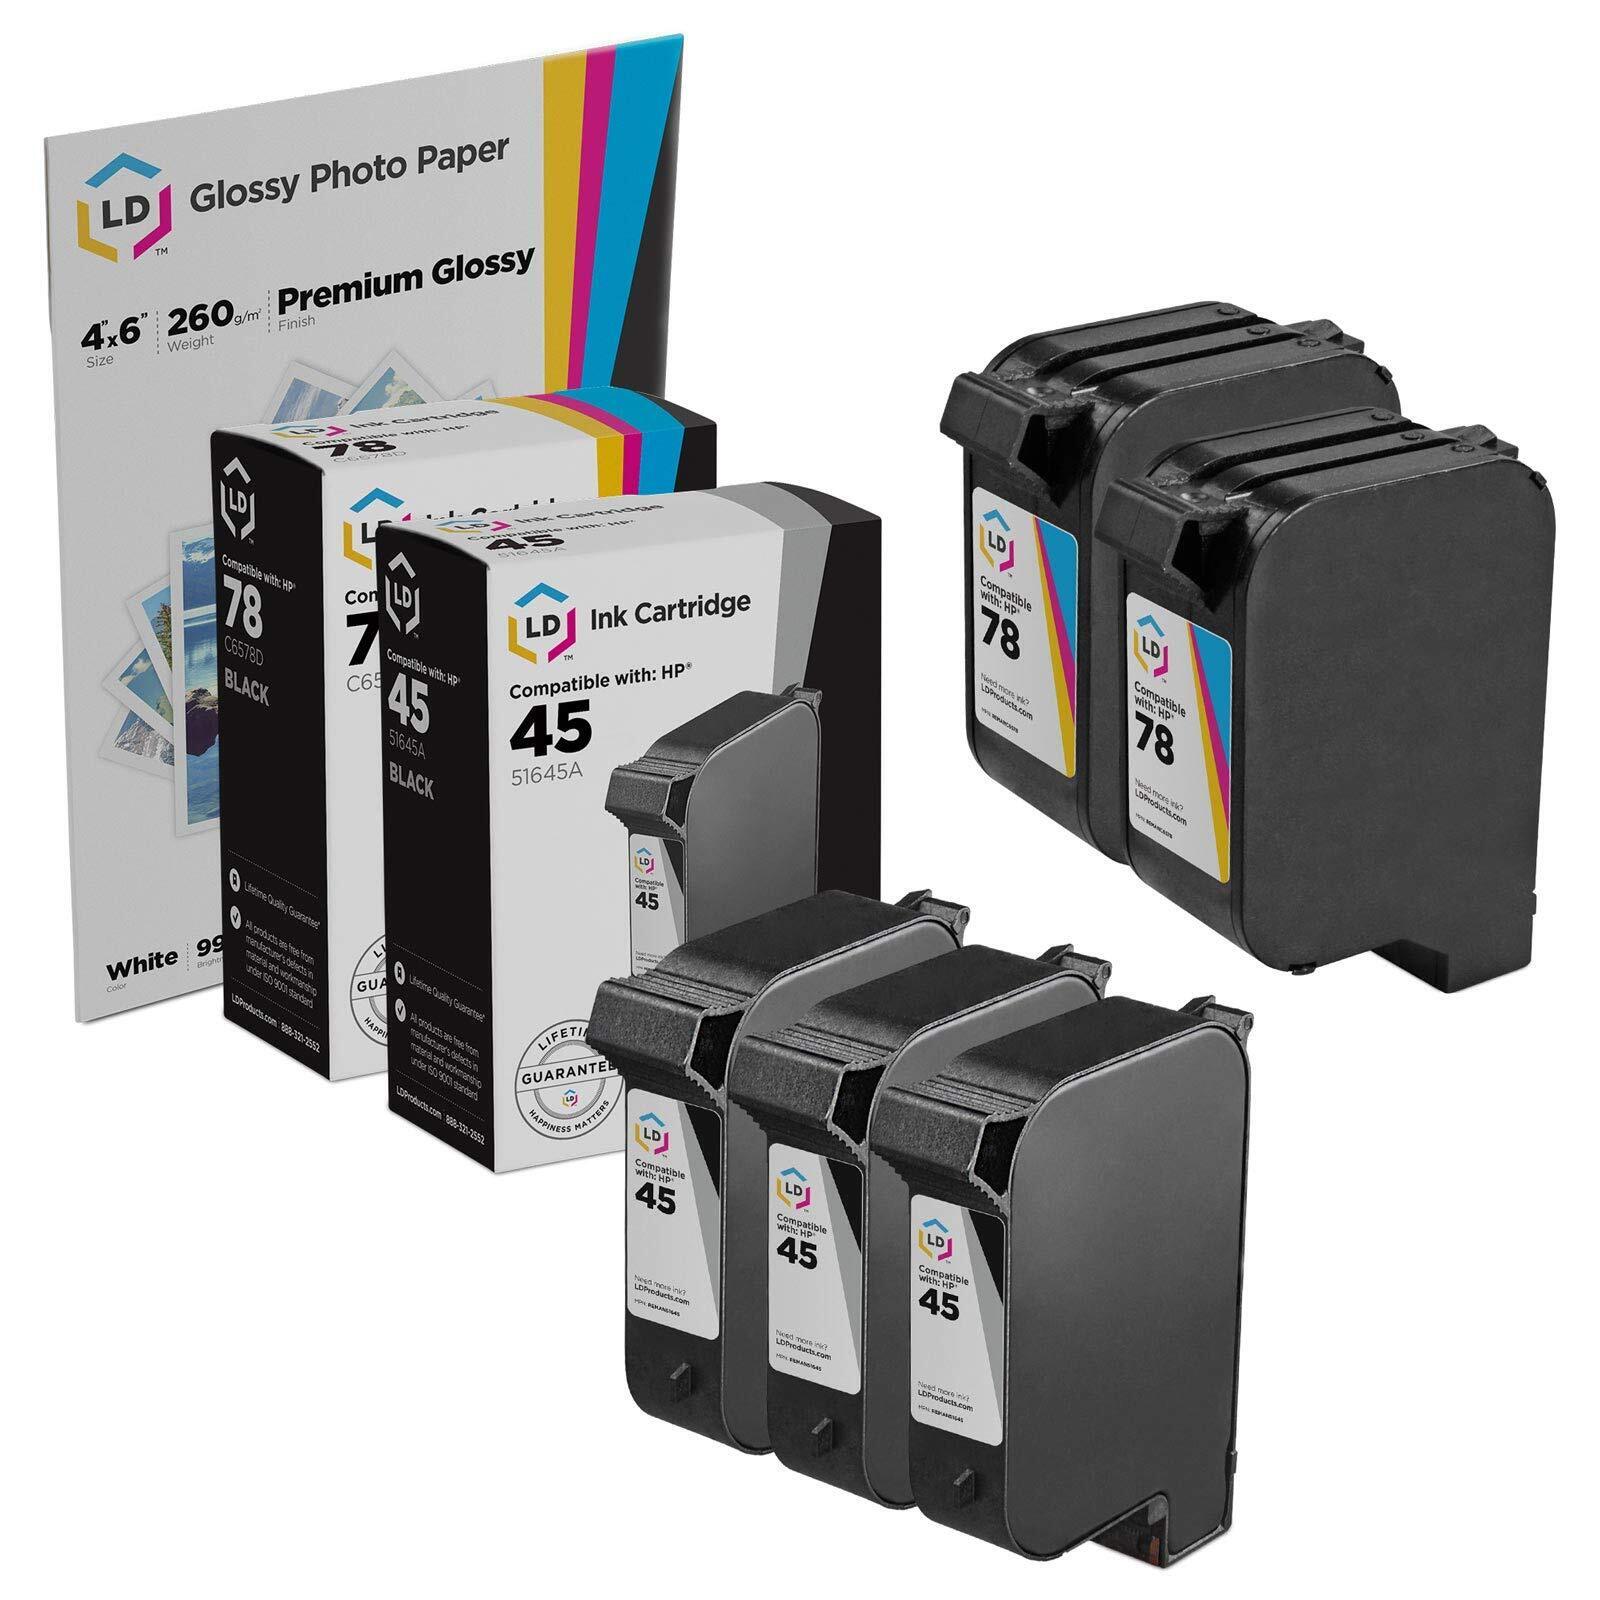 LD Reman Ink Cartridge Replacements 3x HP 45 51645A & 2x HP 78 C6578DN